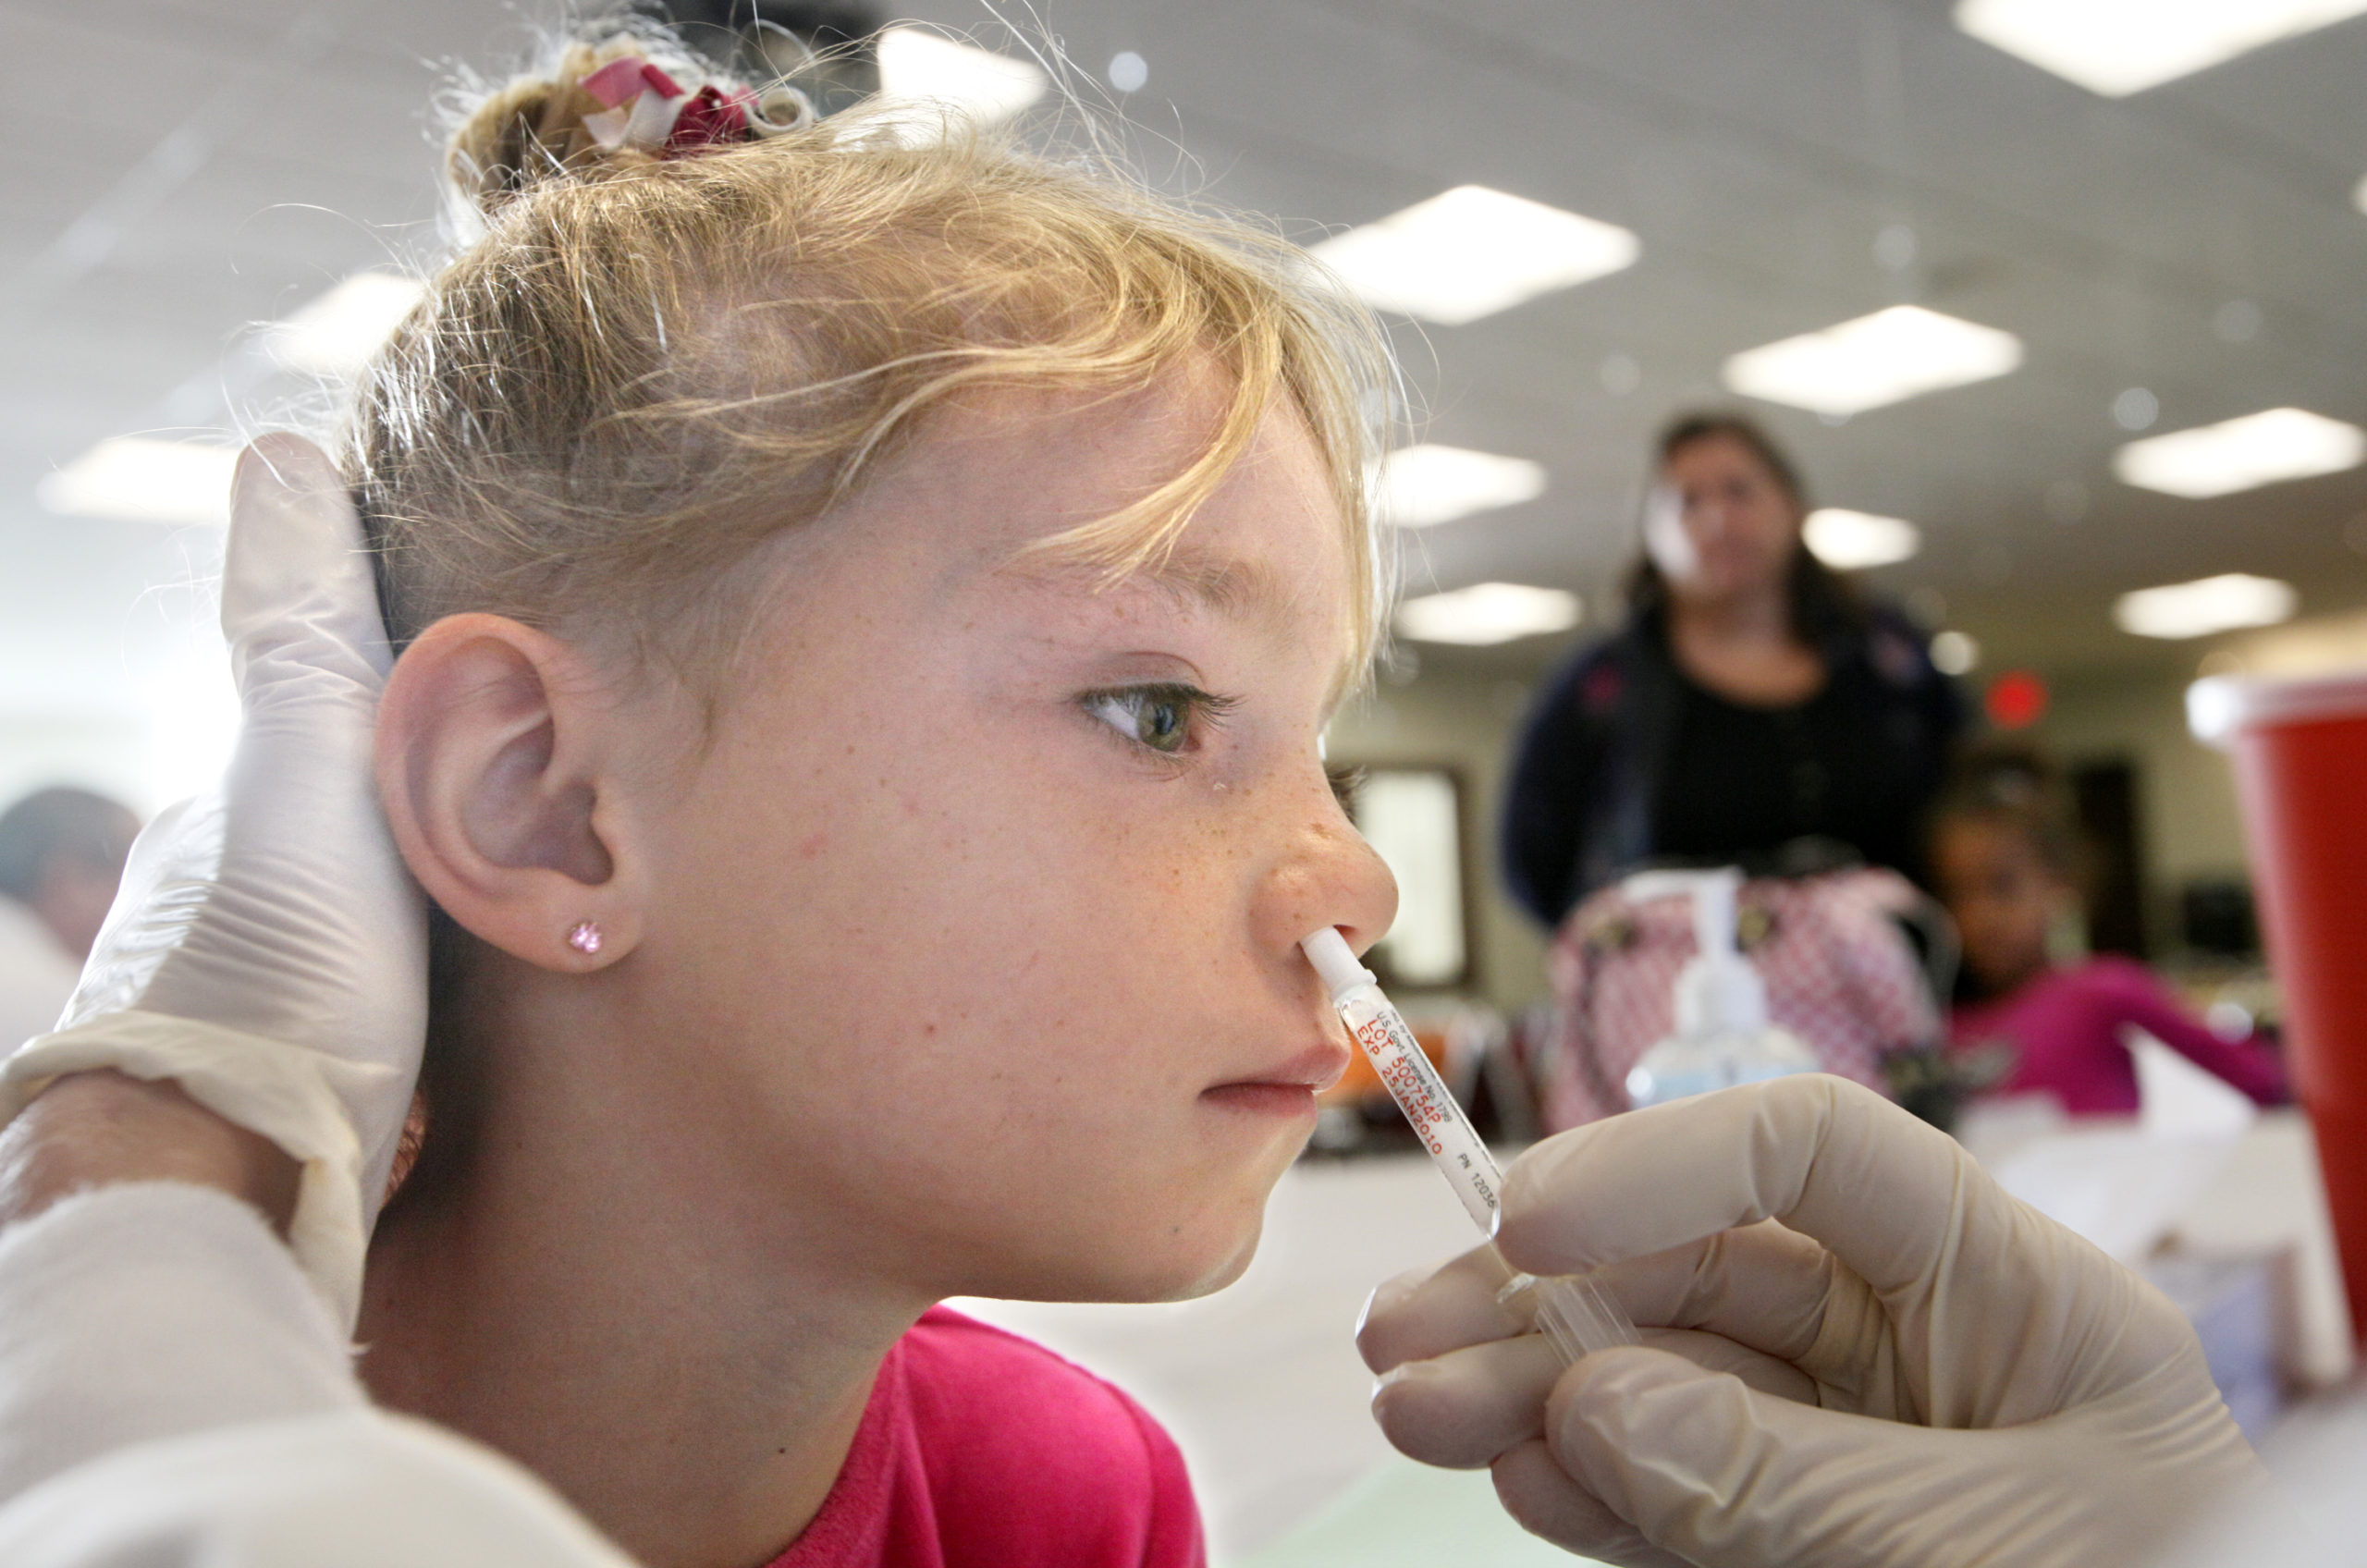 Julie Grasso gets a swine flu vaccination in October 2009 at the Tabernacle Missionary Baptist Church in West Palm Beach. The swine flu killed 230 Floridians and inundated the state’s five laboratories, laying bare weaknesses and prompting warnings that Florida needed to boost epidemic preparedness.